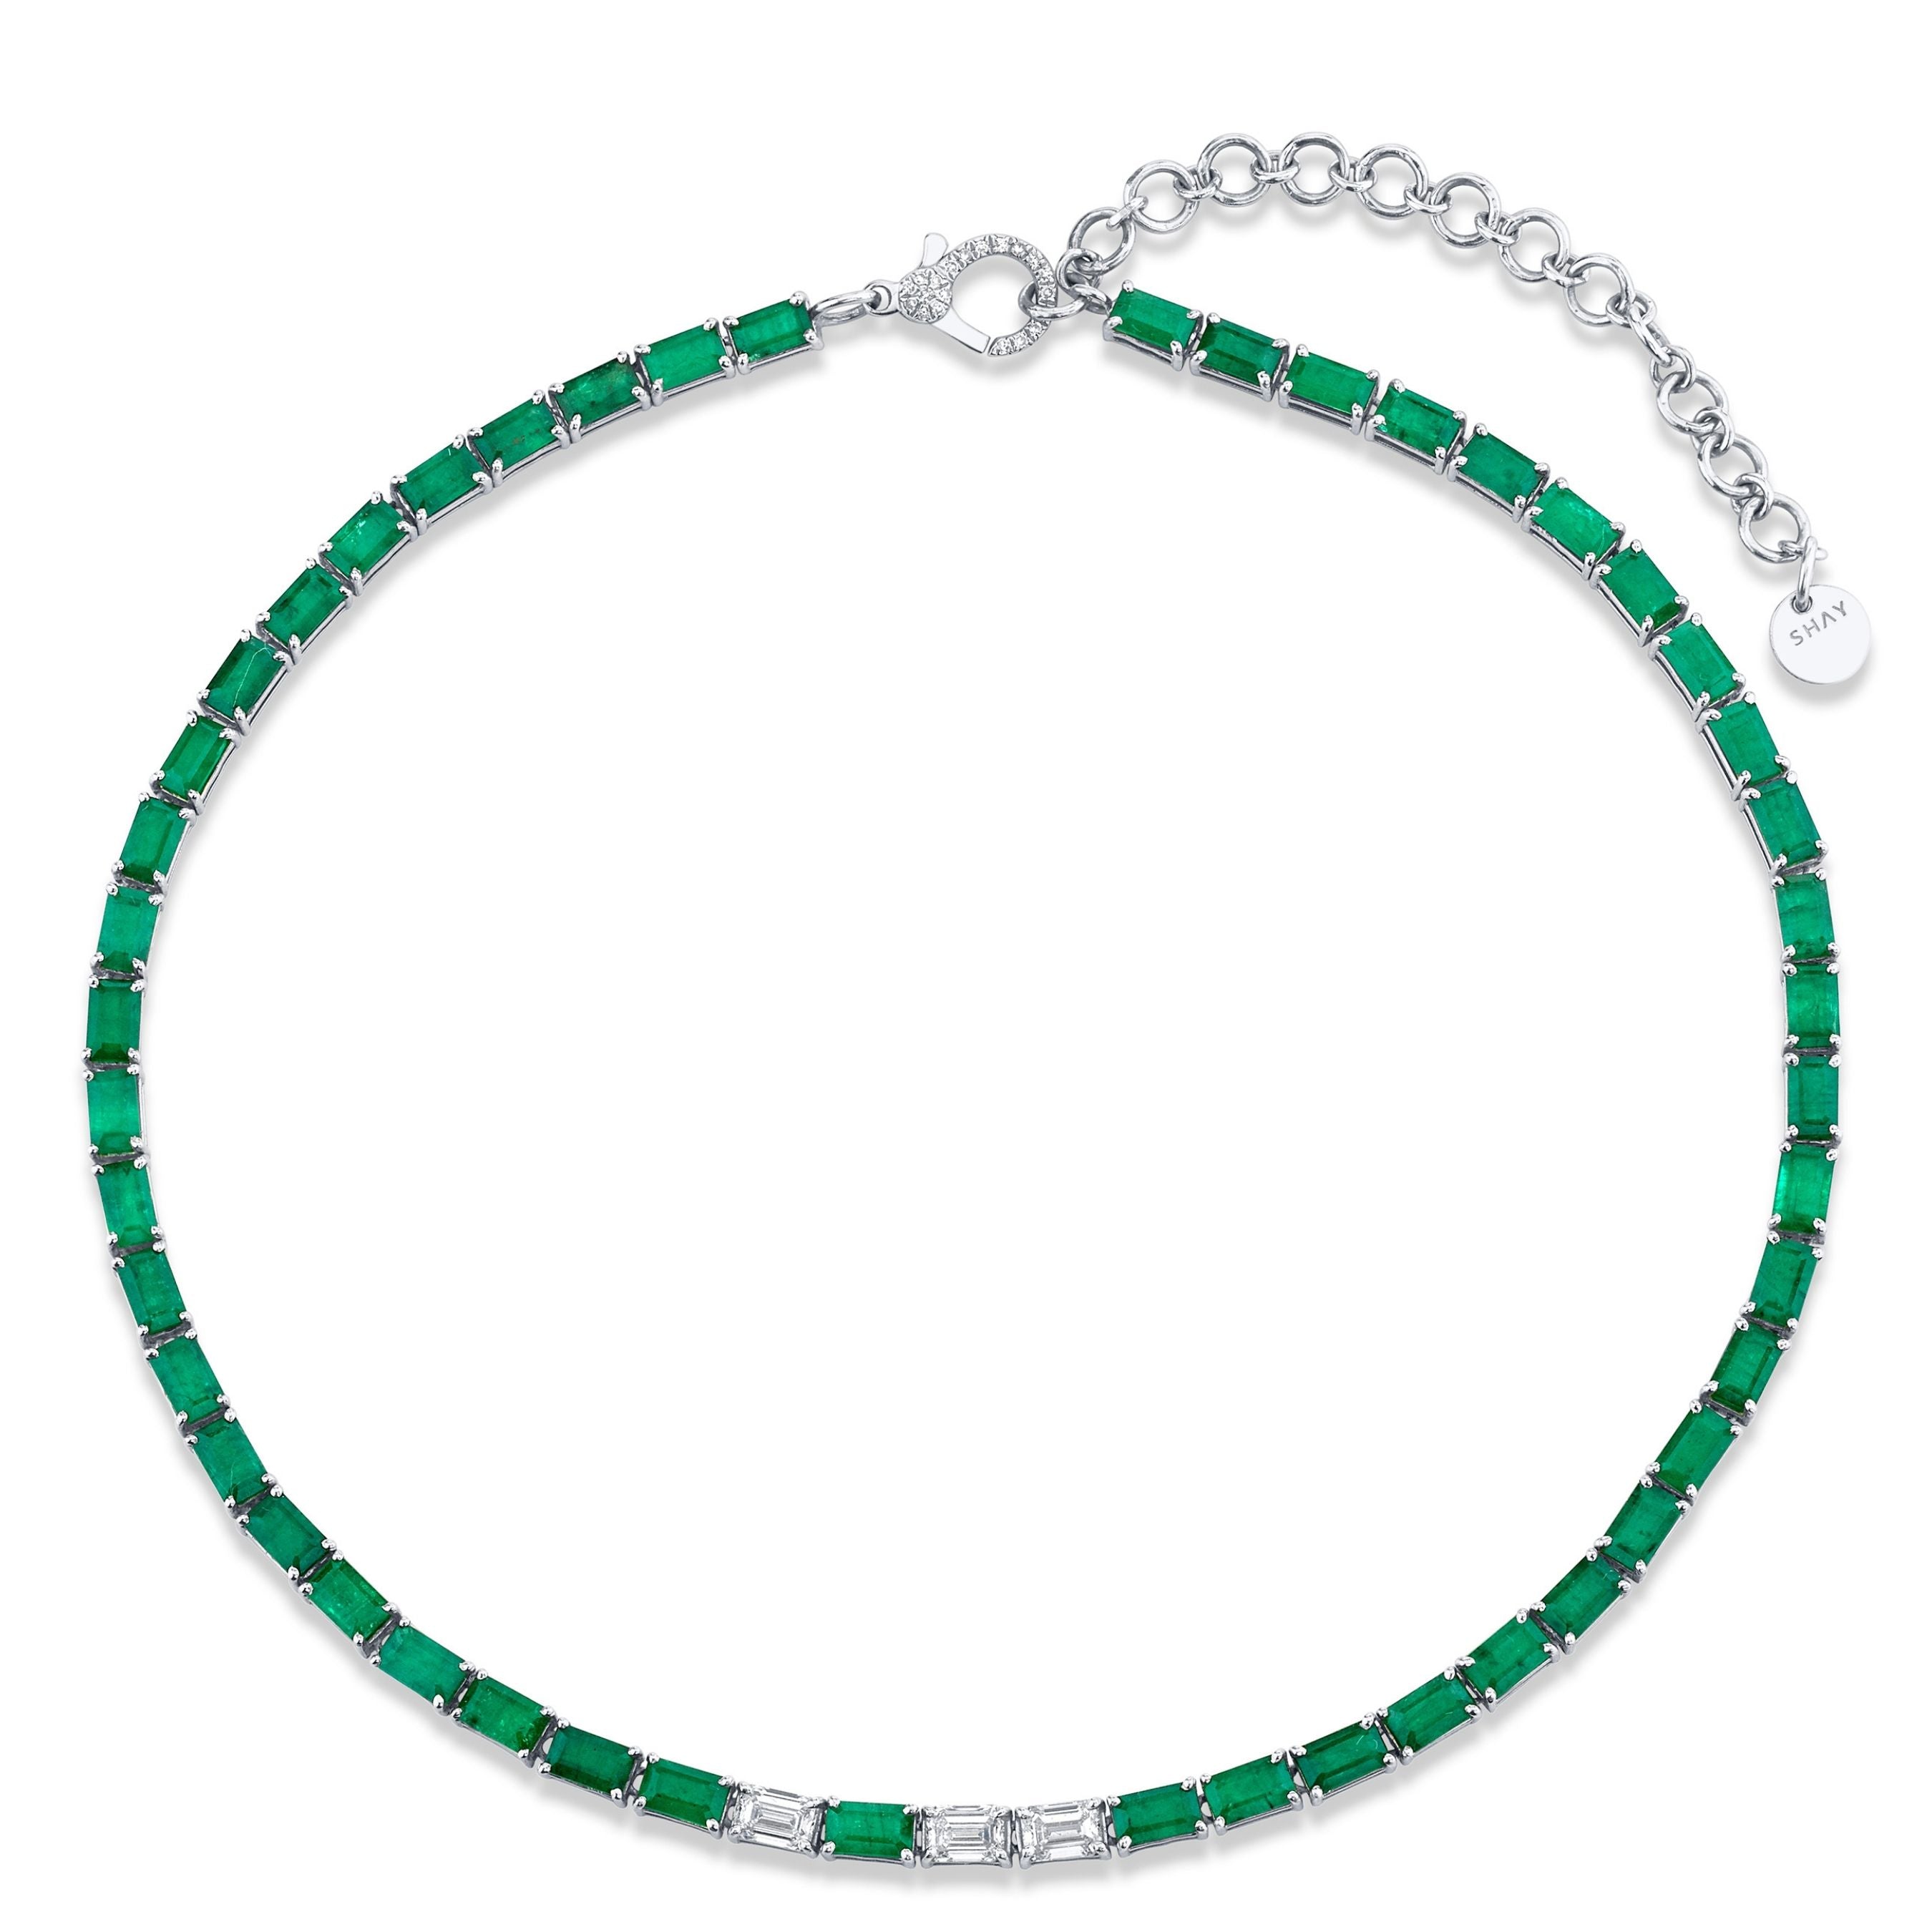 Green Emerald And Diamonds Necklace Bridal Jewelry 226.60 Carats